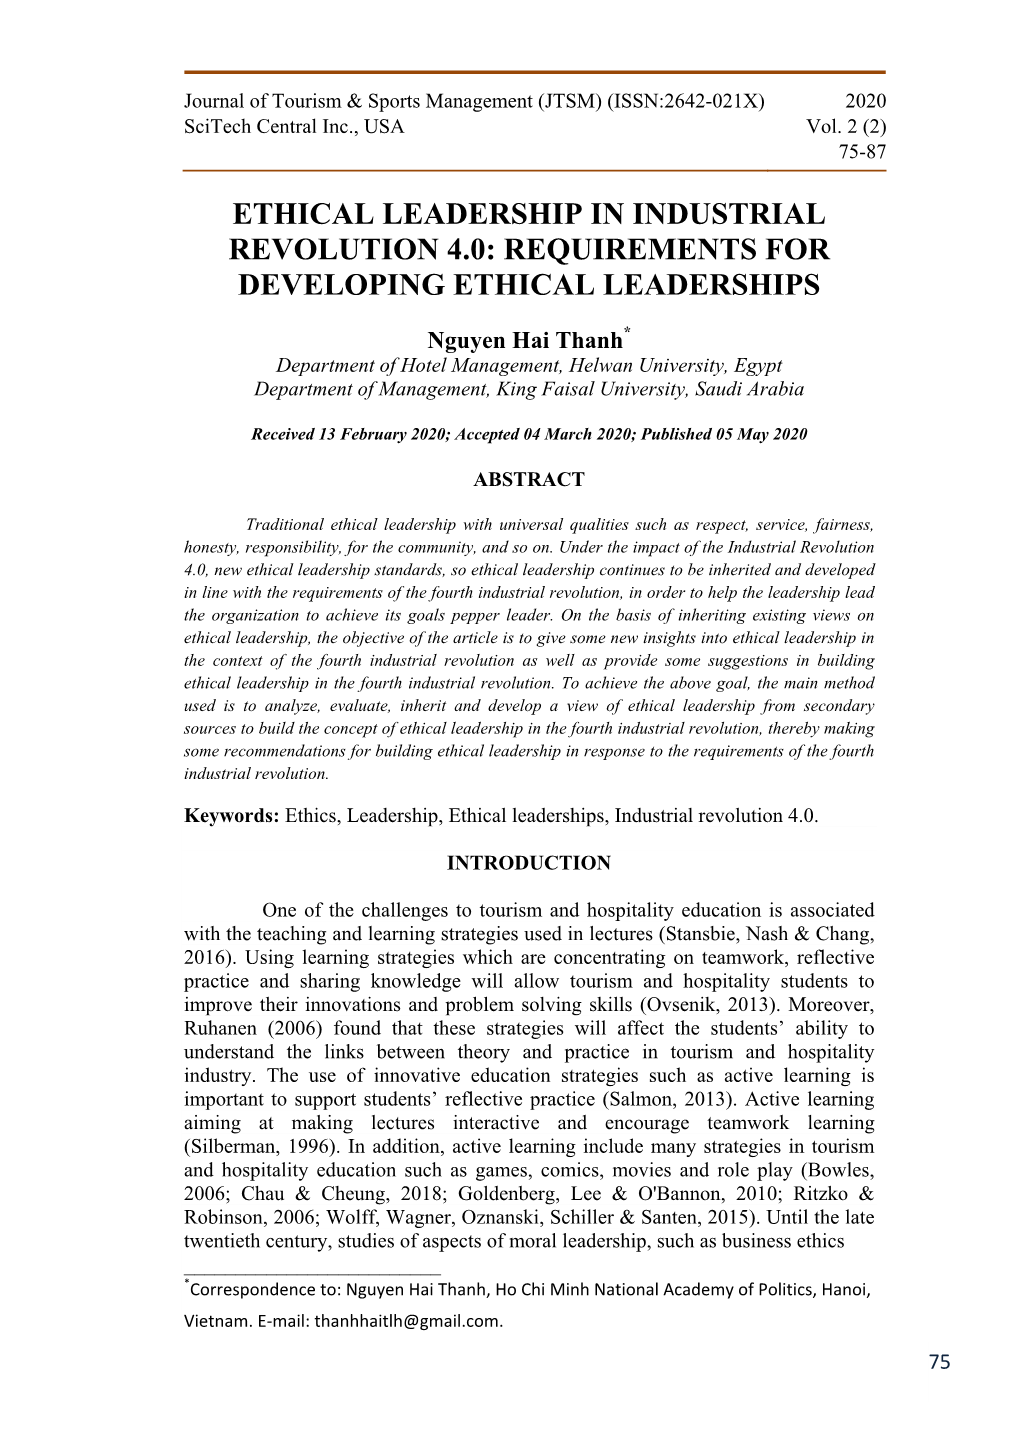 Ethical Leadership in Industrial Revolution 4.0: Requirements for Developing Ethical Leaderships